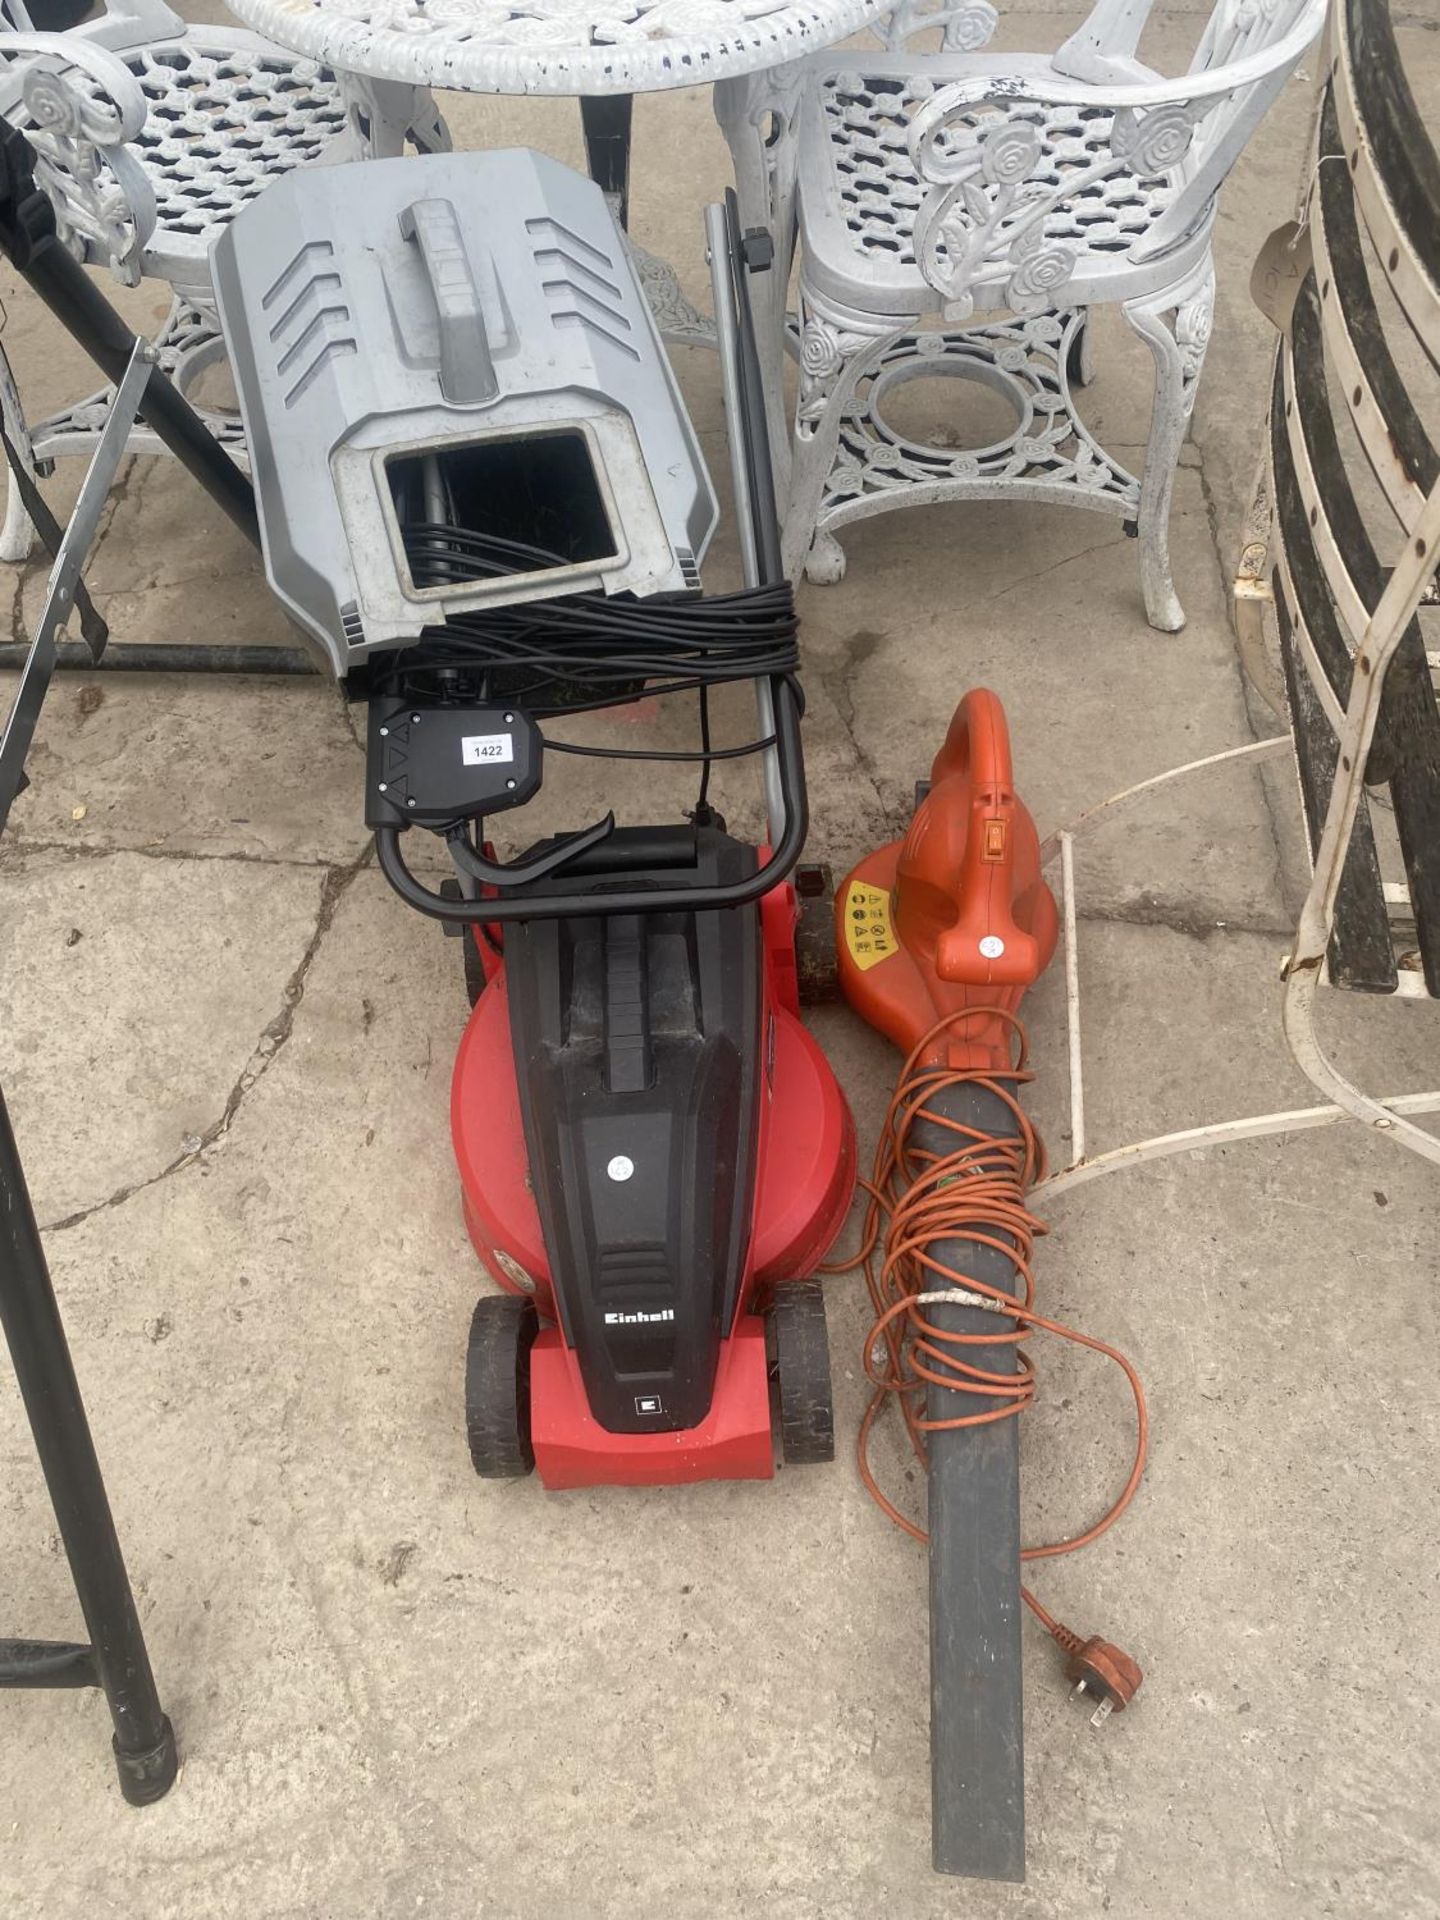 AN EINHELL ELECTRIC LAWN MOWER AND AN ELECTRIC LEAF BLOWER